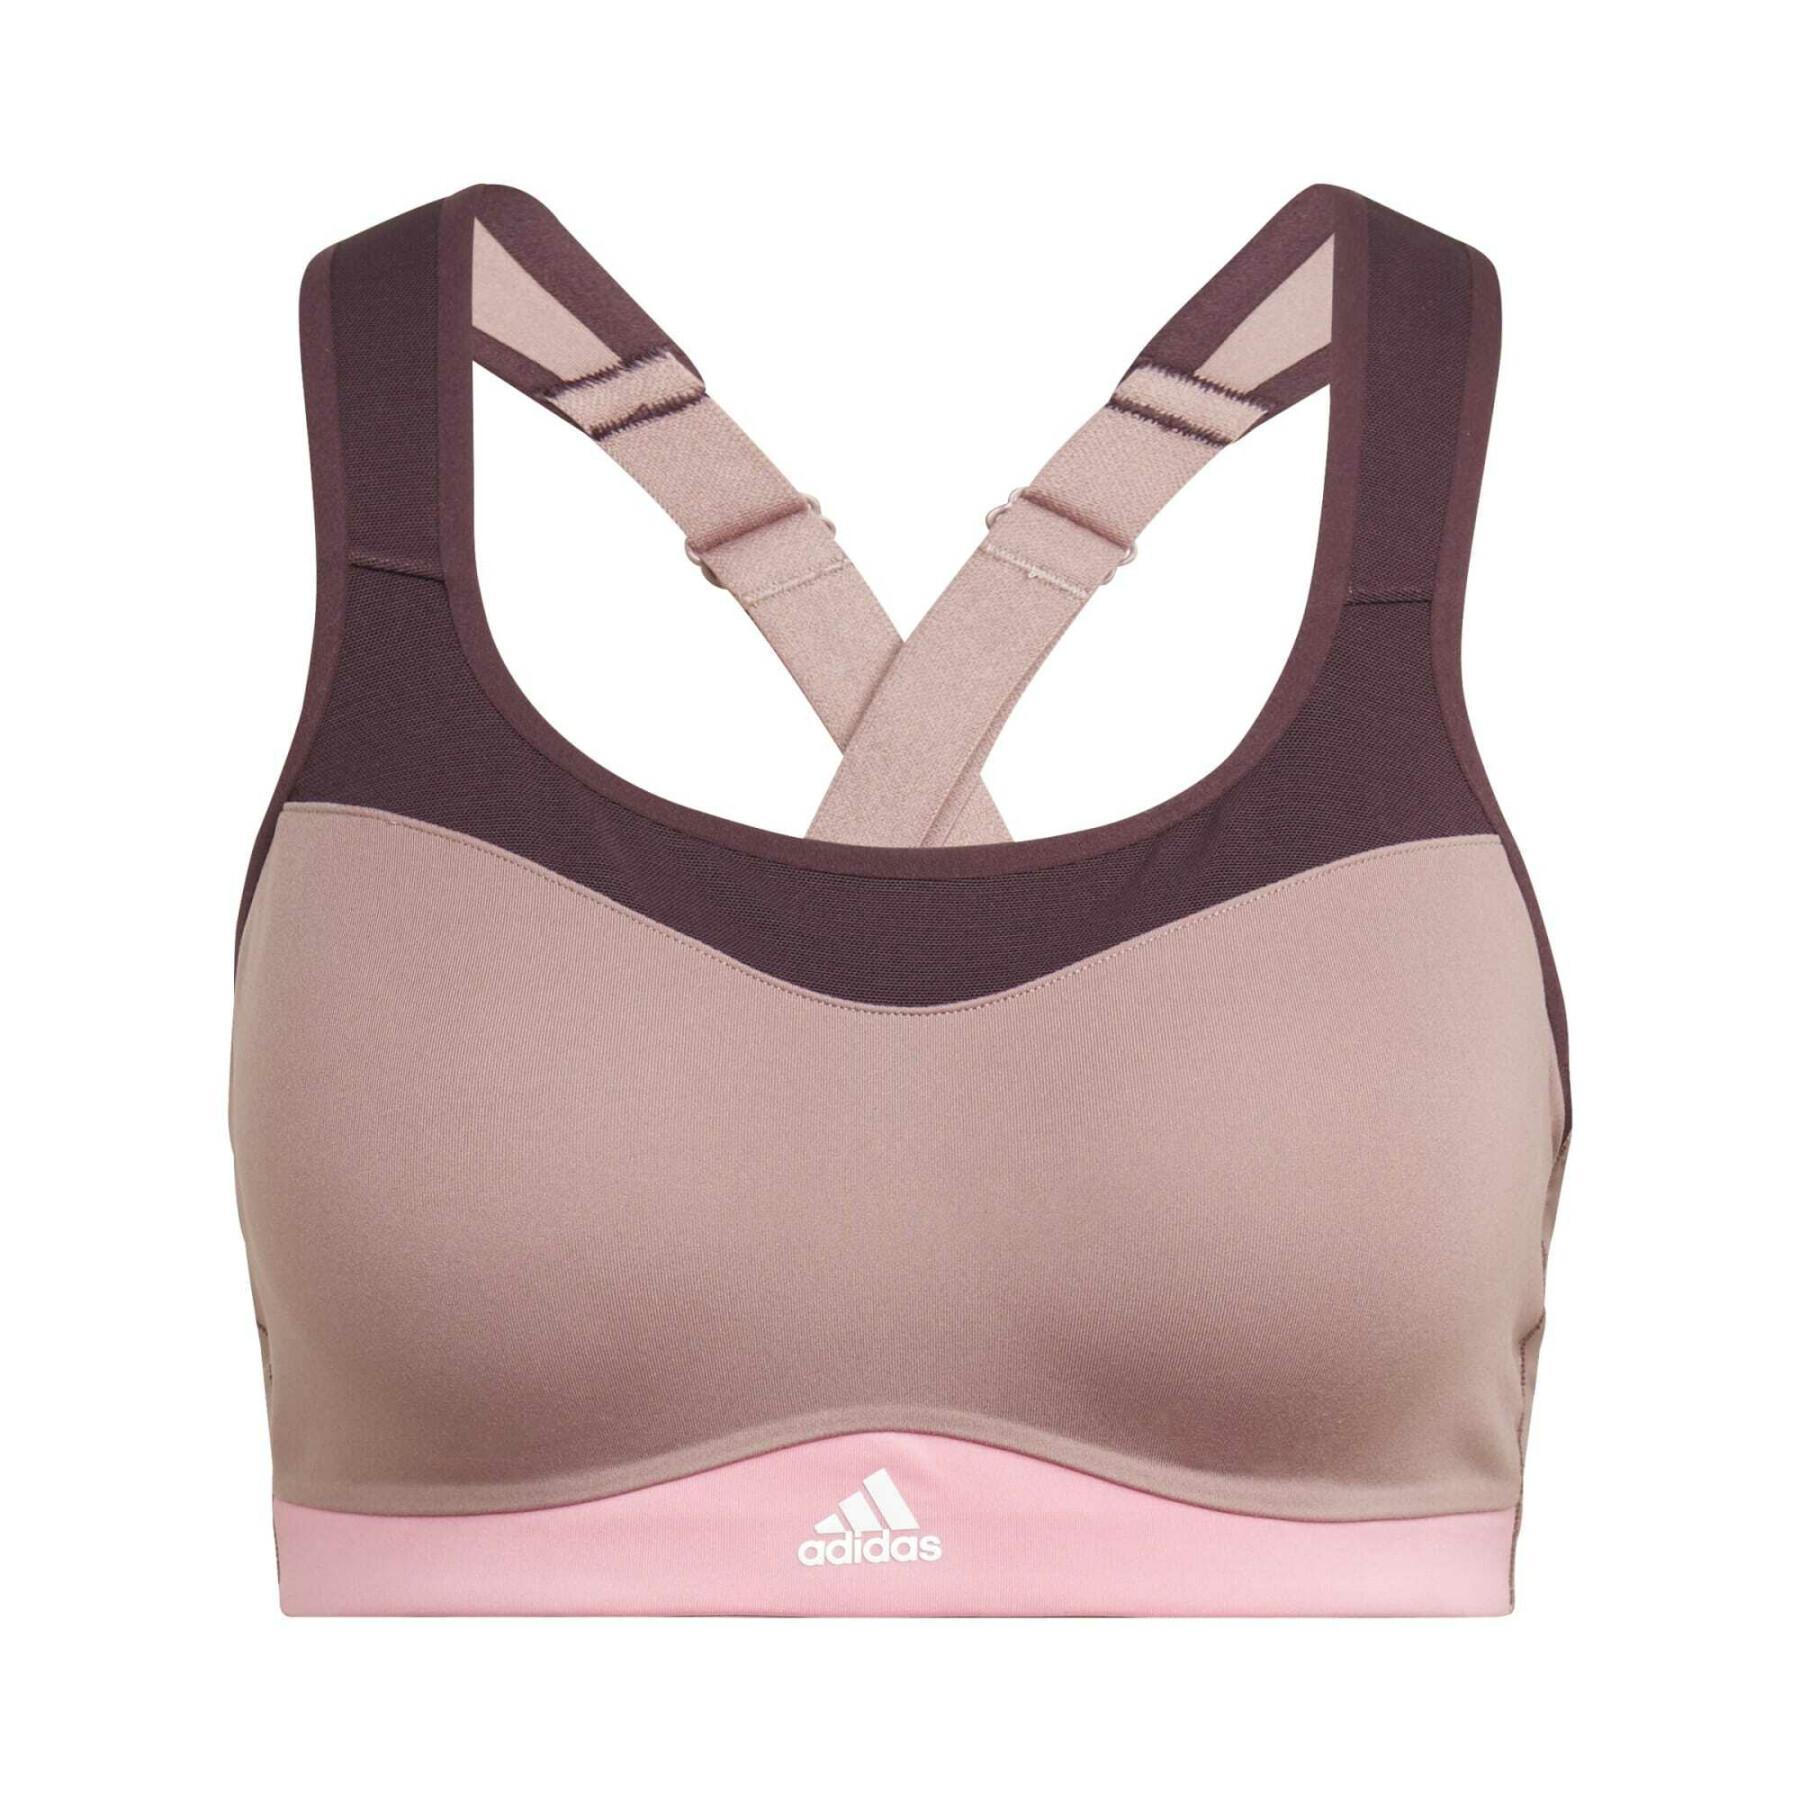 High support training bra for women adidas TLRD Impact - Textile